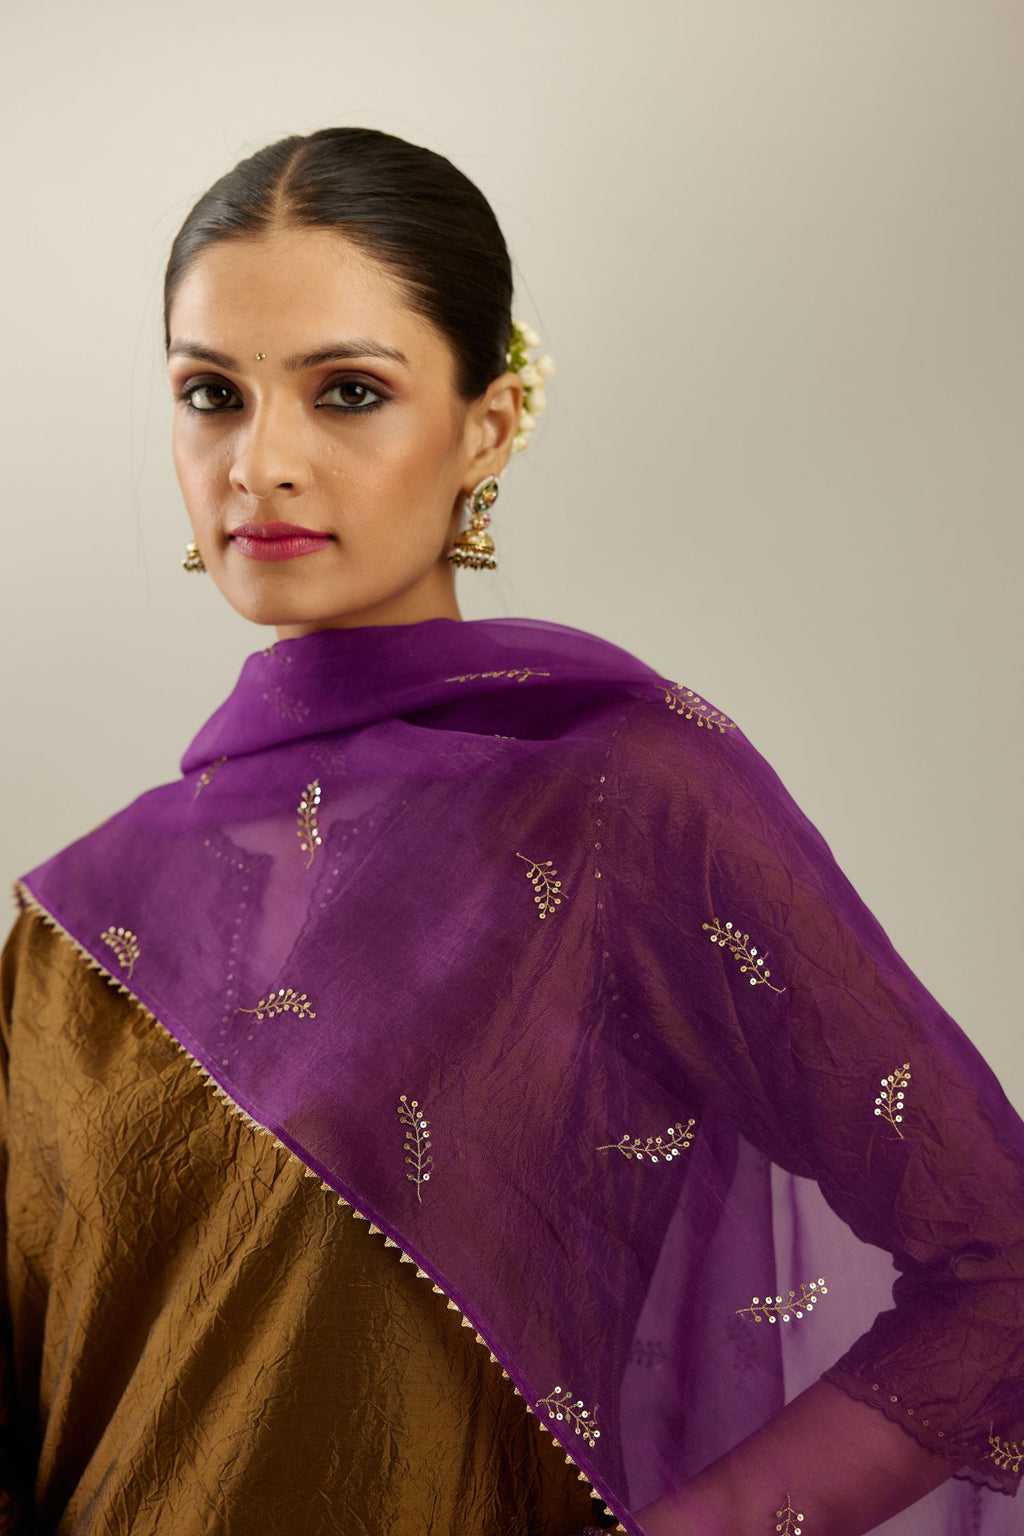 Sangria silk organza dupatta with embroidered leaf clusters on all four corners of the dupatta and small leaf motif sprayed all over it